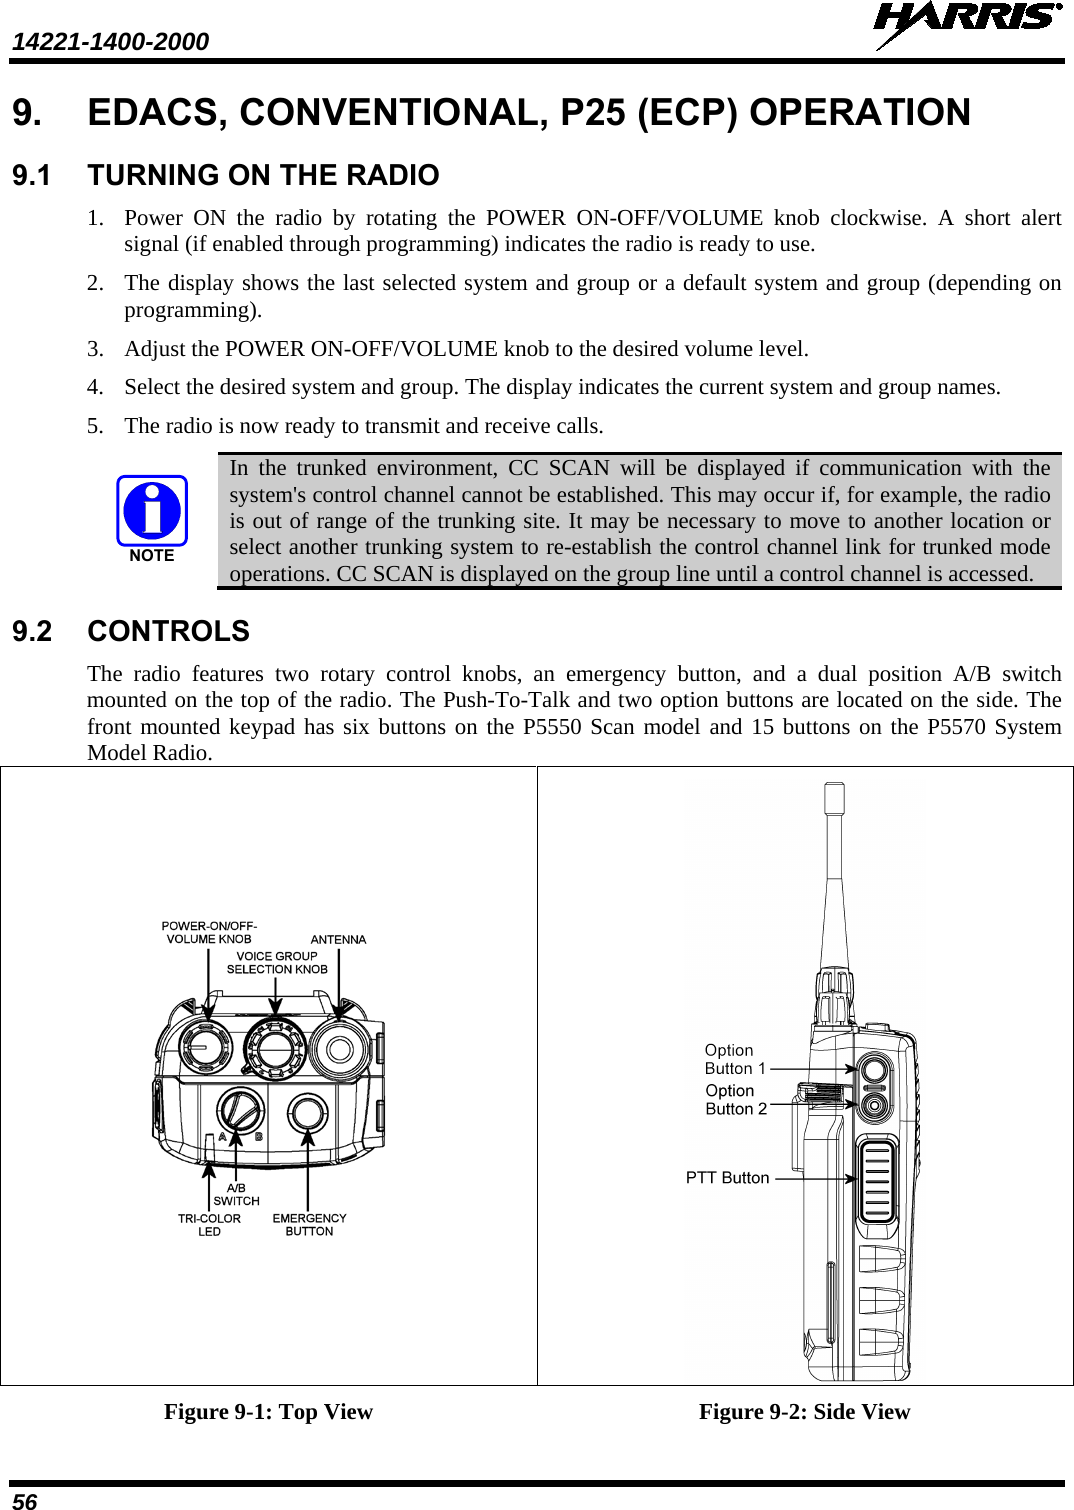 14221-1400-2000    56 9. EDACS, CONVENTIONAL, P25 (ECP) OPERATION 9.1 TURNING ON THE RADIO 1. Power ON the radio by rotating the POWER ON-OFF/VOLUME knob clockwise. A short alert signal (if enabled through programming) indicates the radio is ready to use.  2. The display shows the last selected system and group or a default system and group (depending on programming).  3. Adjust the POWER ON-OFF/VOLUME knob to the desired volume level.  4. Select the desired system and group. The display indicates the current system and group names.  5. The radio is now ready to transmit and receive calls. NOTE In the trunked environment, CC SCAN will be displayed if communication with the system&apos;s control channel cannot be established. This may occur if, for example, the radio is out of range of the trunking site. It may be necessary to move to another location or select another trunking system to re-establish the control channel link for trunked mode operations. CC SCAN is displayed on the group line until a control channel is accessed. 9.2 CONTROLS The radio features two rotary control knobs,  an emergency button,  and a dual position A/B switch mounted on the top of the radio. The Push-To-Talk and two option buttons are located on the side. The front mounted keypad has six buttons on the P5550 Scan model and 15 buttons on the P5570 System Model Radio.   Figure 9-1: Top View Figure 9-2: Side View 